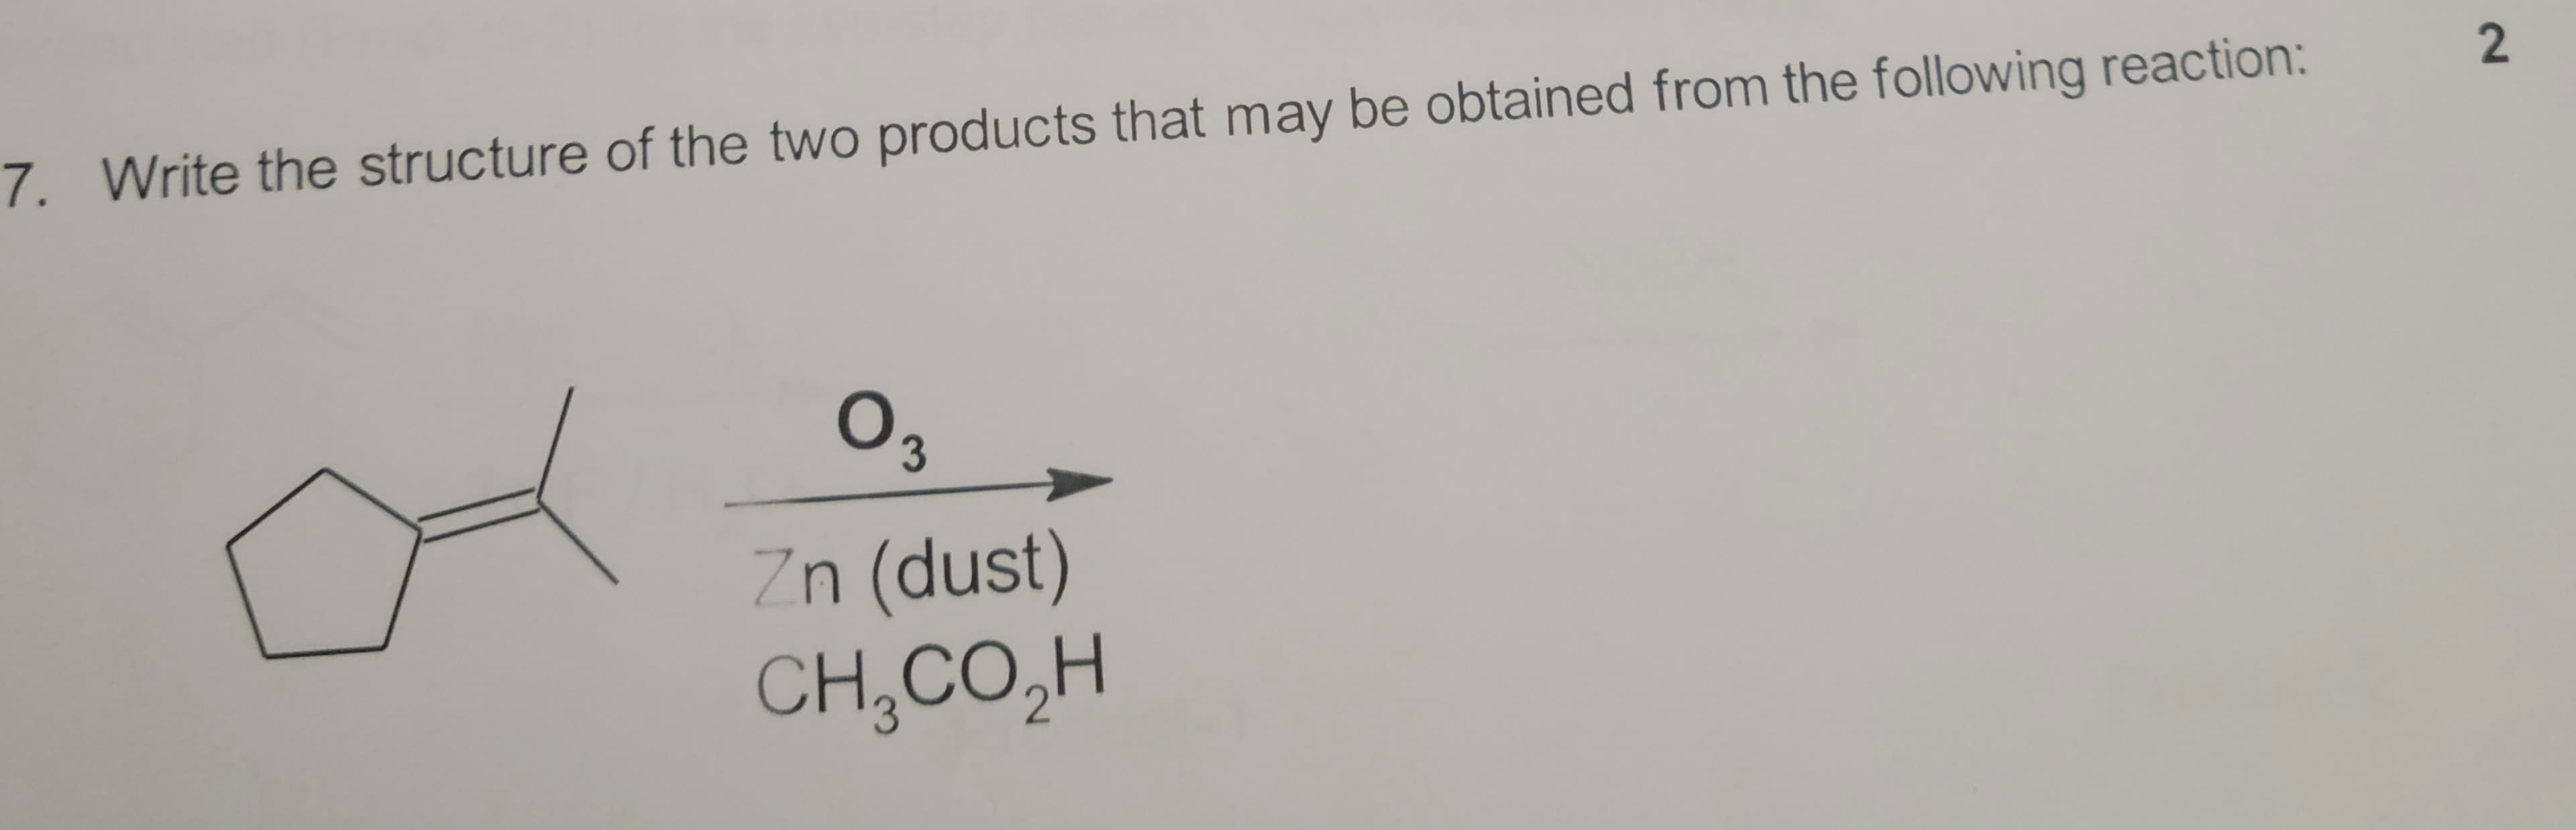 7. Write the structure of the two products that may be obtained from the following reaction:
3
Zn (dust)
CH,CO,H
2.
